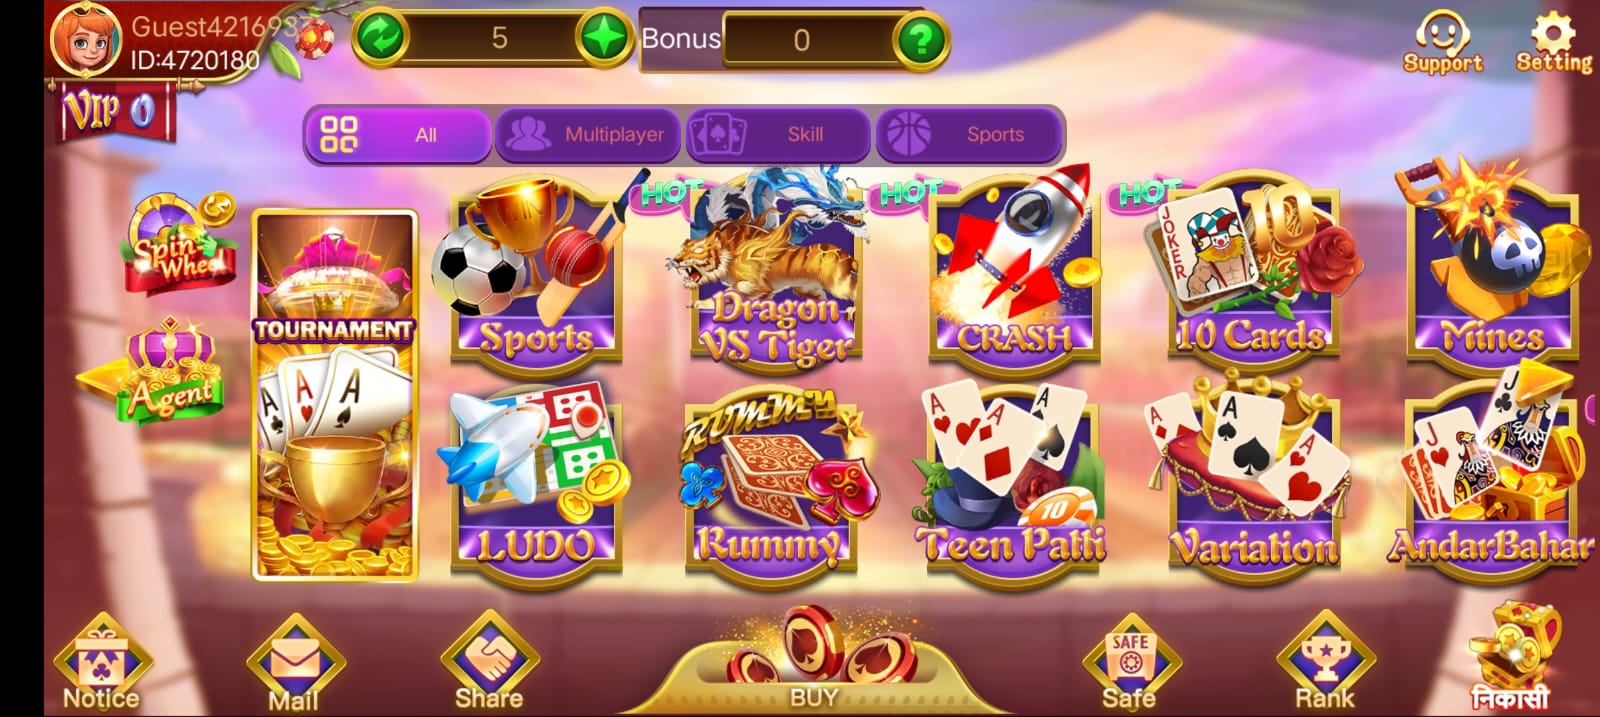 Available Games on Rummy Tour App